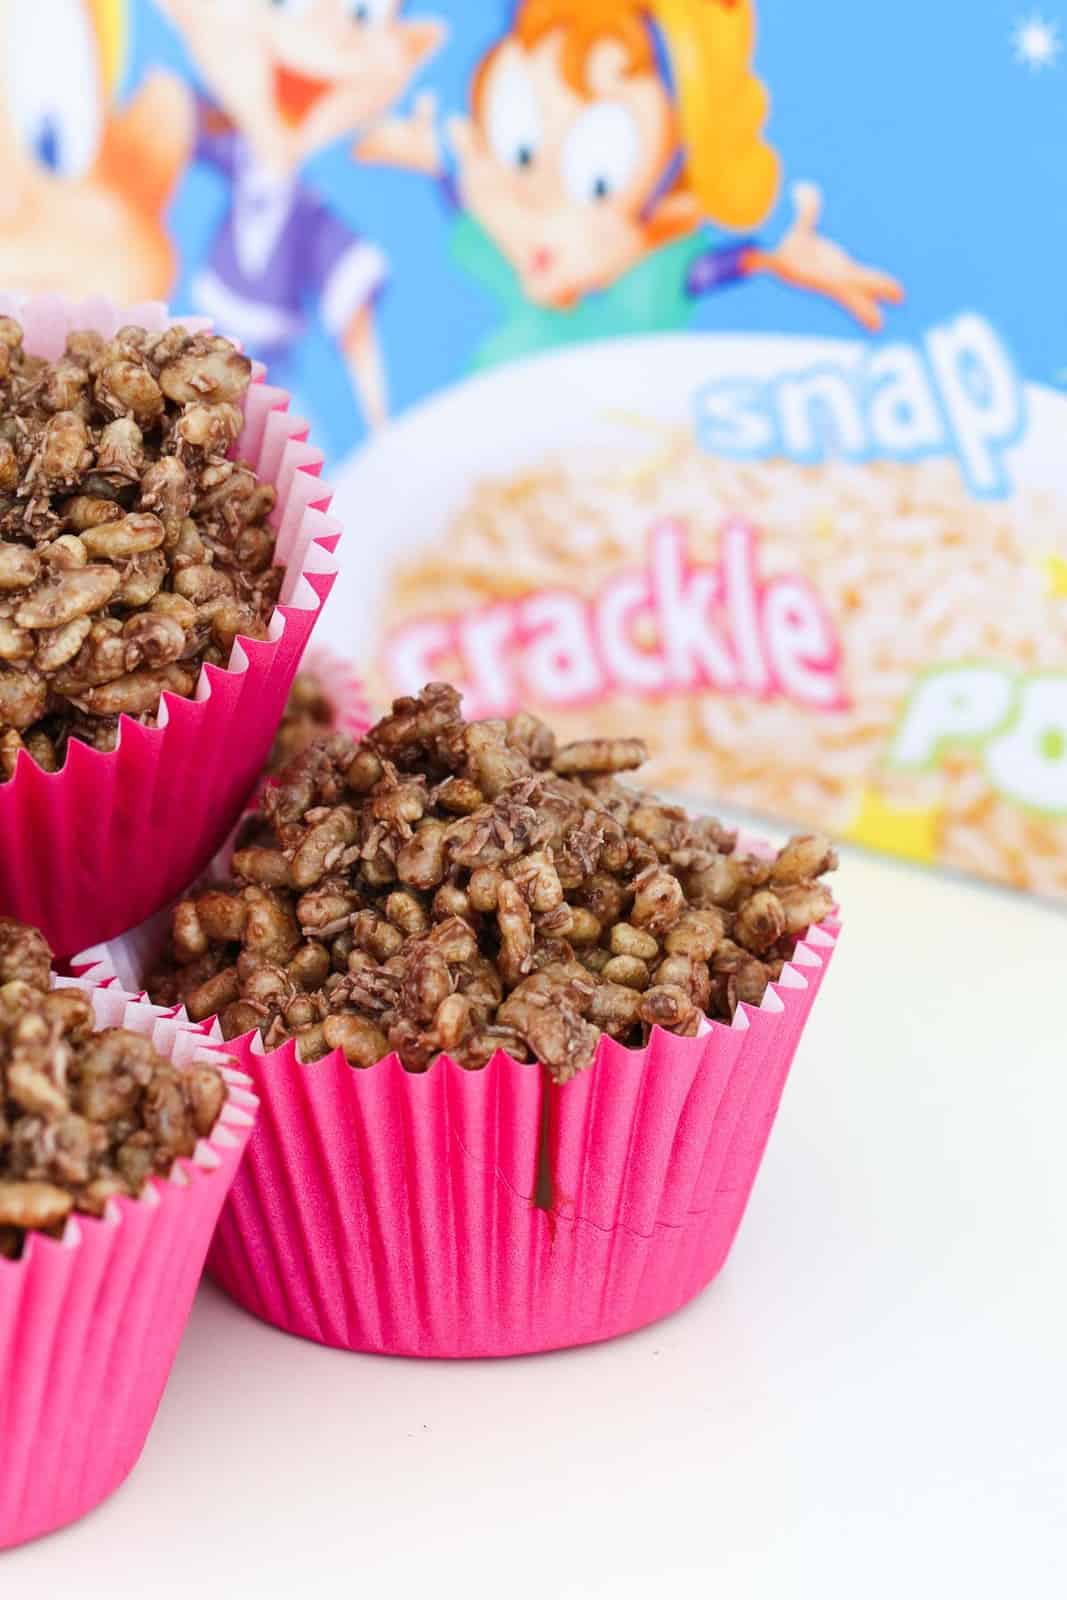 Chocolate crackles in pink paper cases.